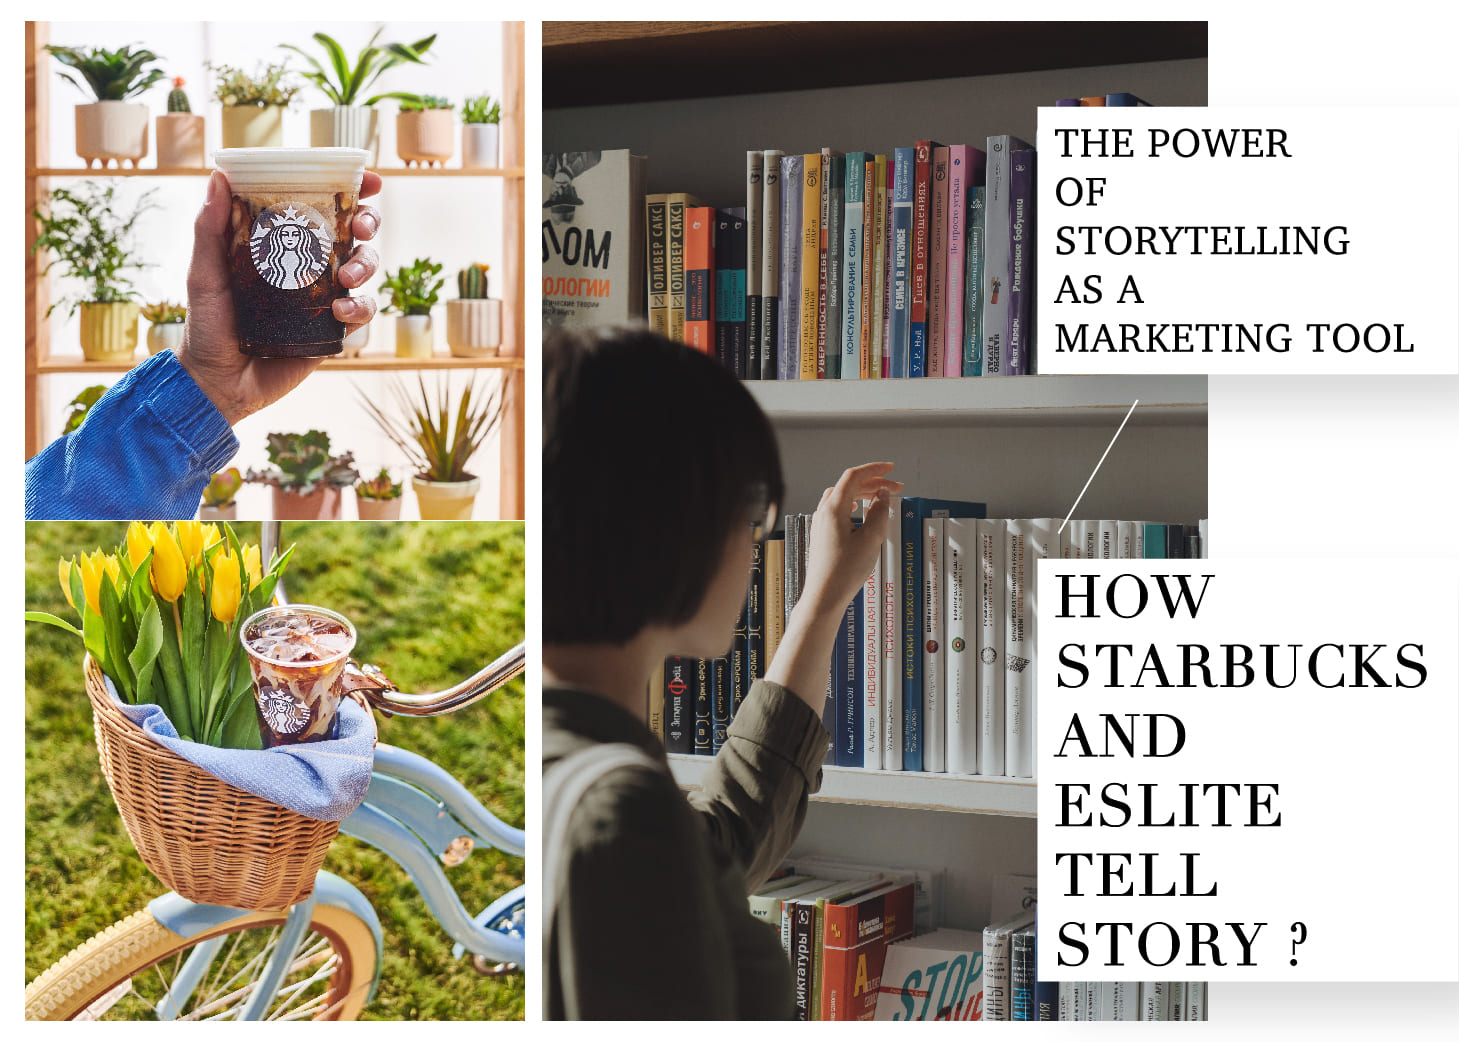 【The Power of Storytelling as a Marketing Tool: How Starbucks and eslite tell story?行銷人】用「故事行銷」幫你的TA貼標籤！連鎖咖啡星巴克、誠品書店也用這招